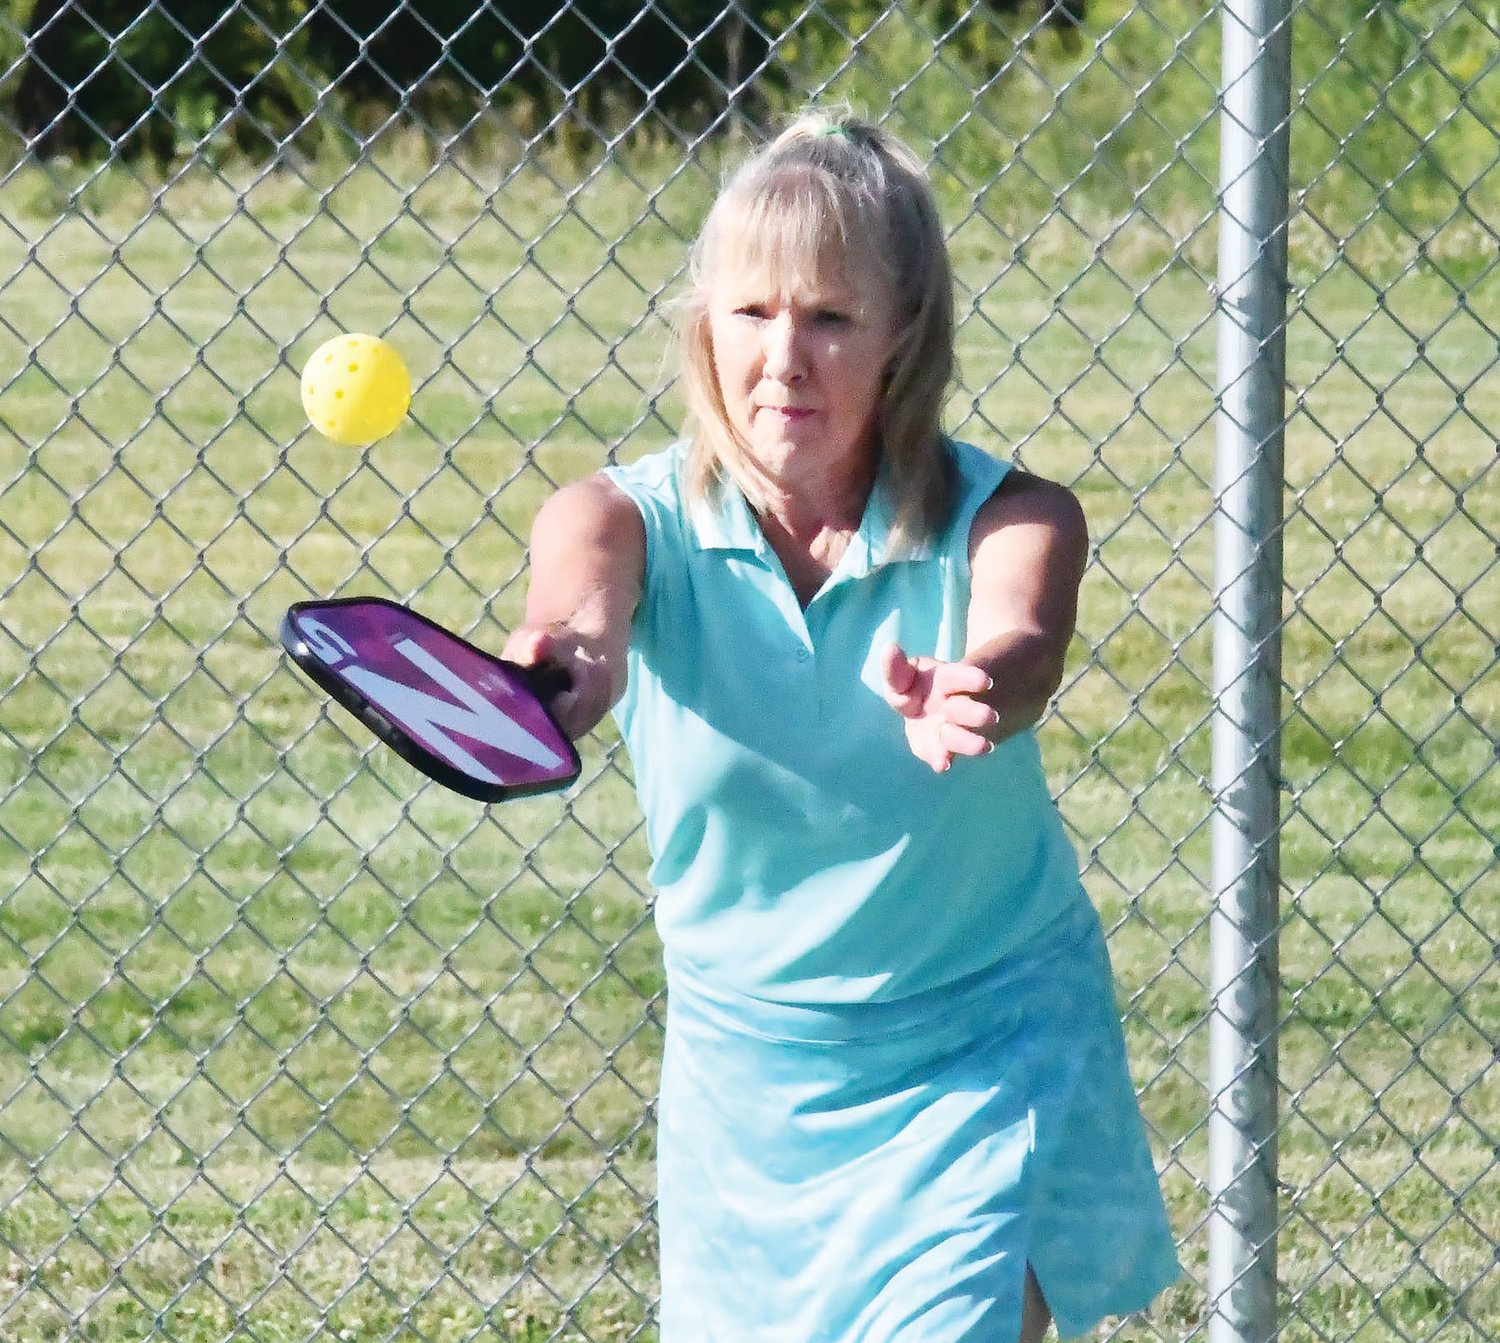 Kathleen Wilson of Paris serves during a doubles match as part of the Moberly Parks and Recreation Department’s beginners’ pickleball course on Thursday, June 16, at Fox Park off Russhaven Drive.